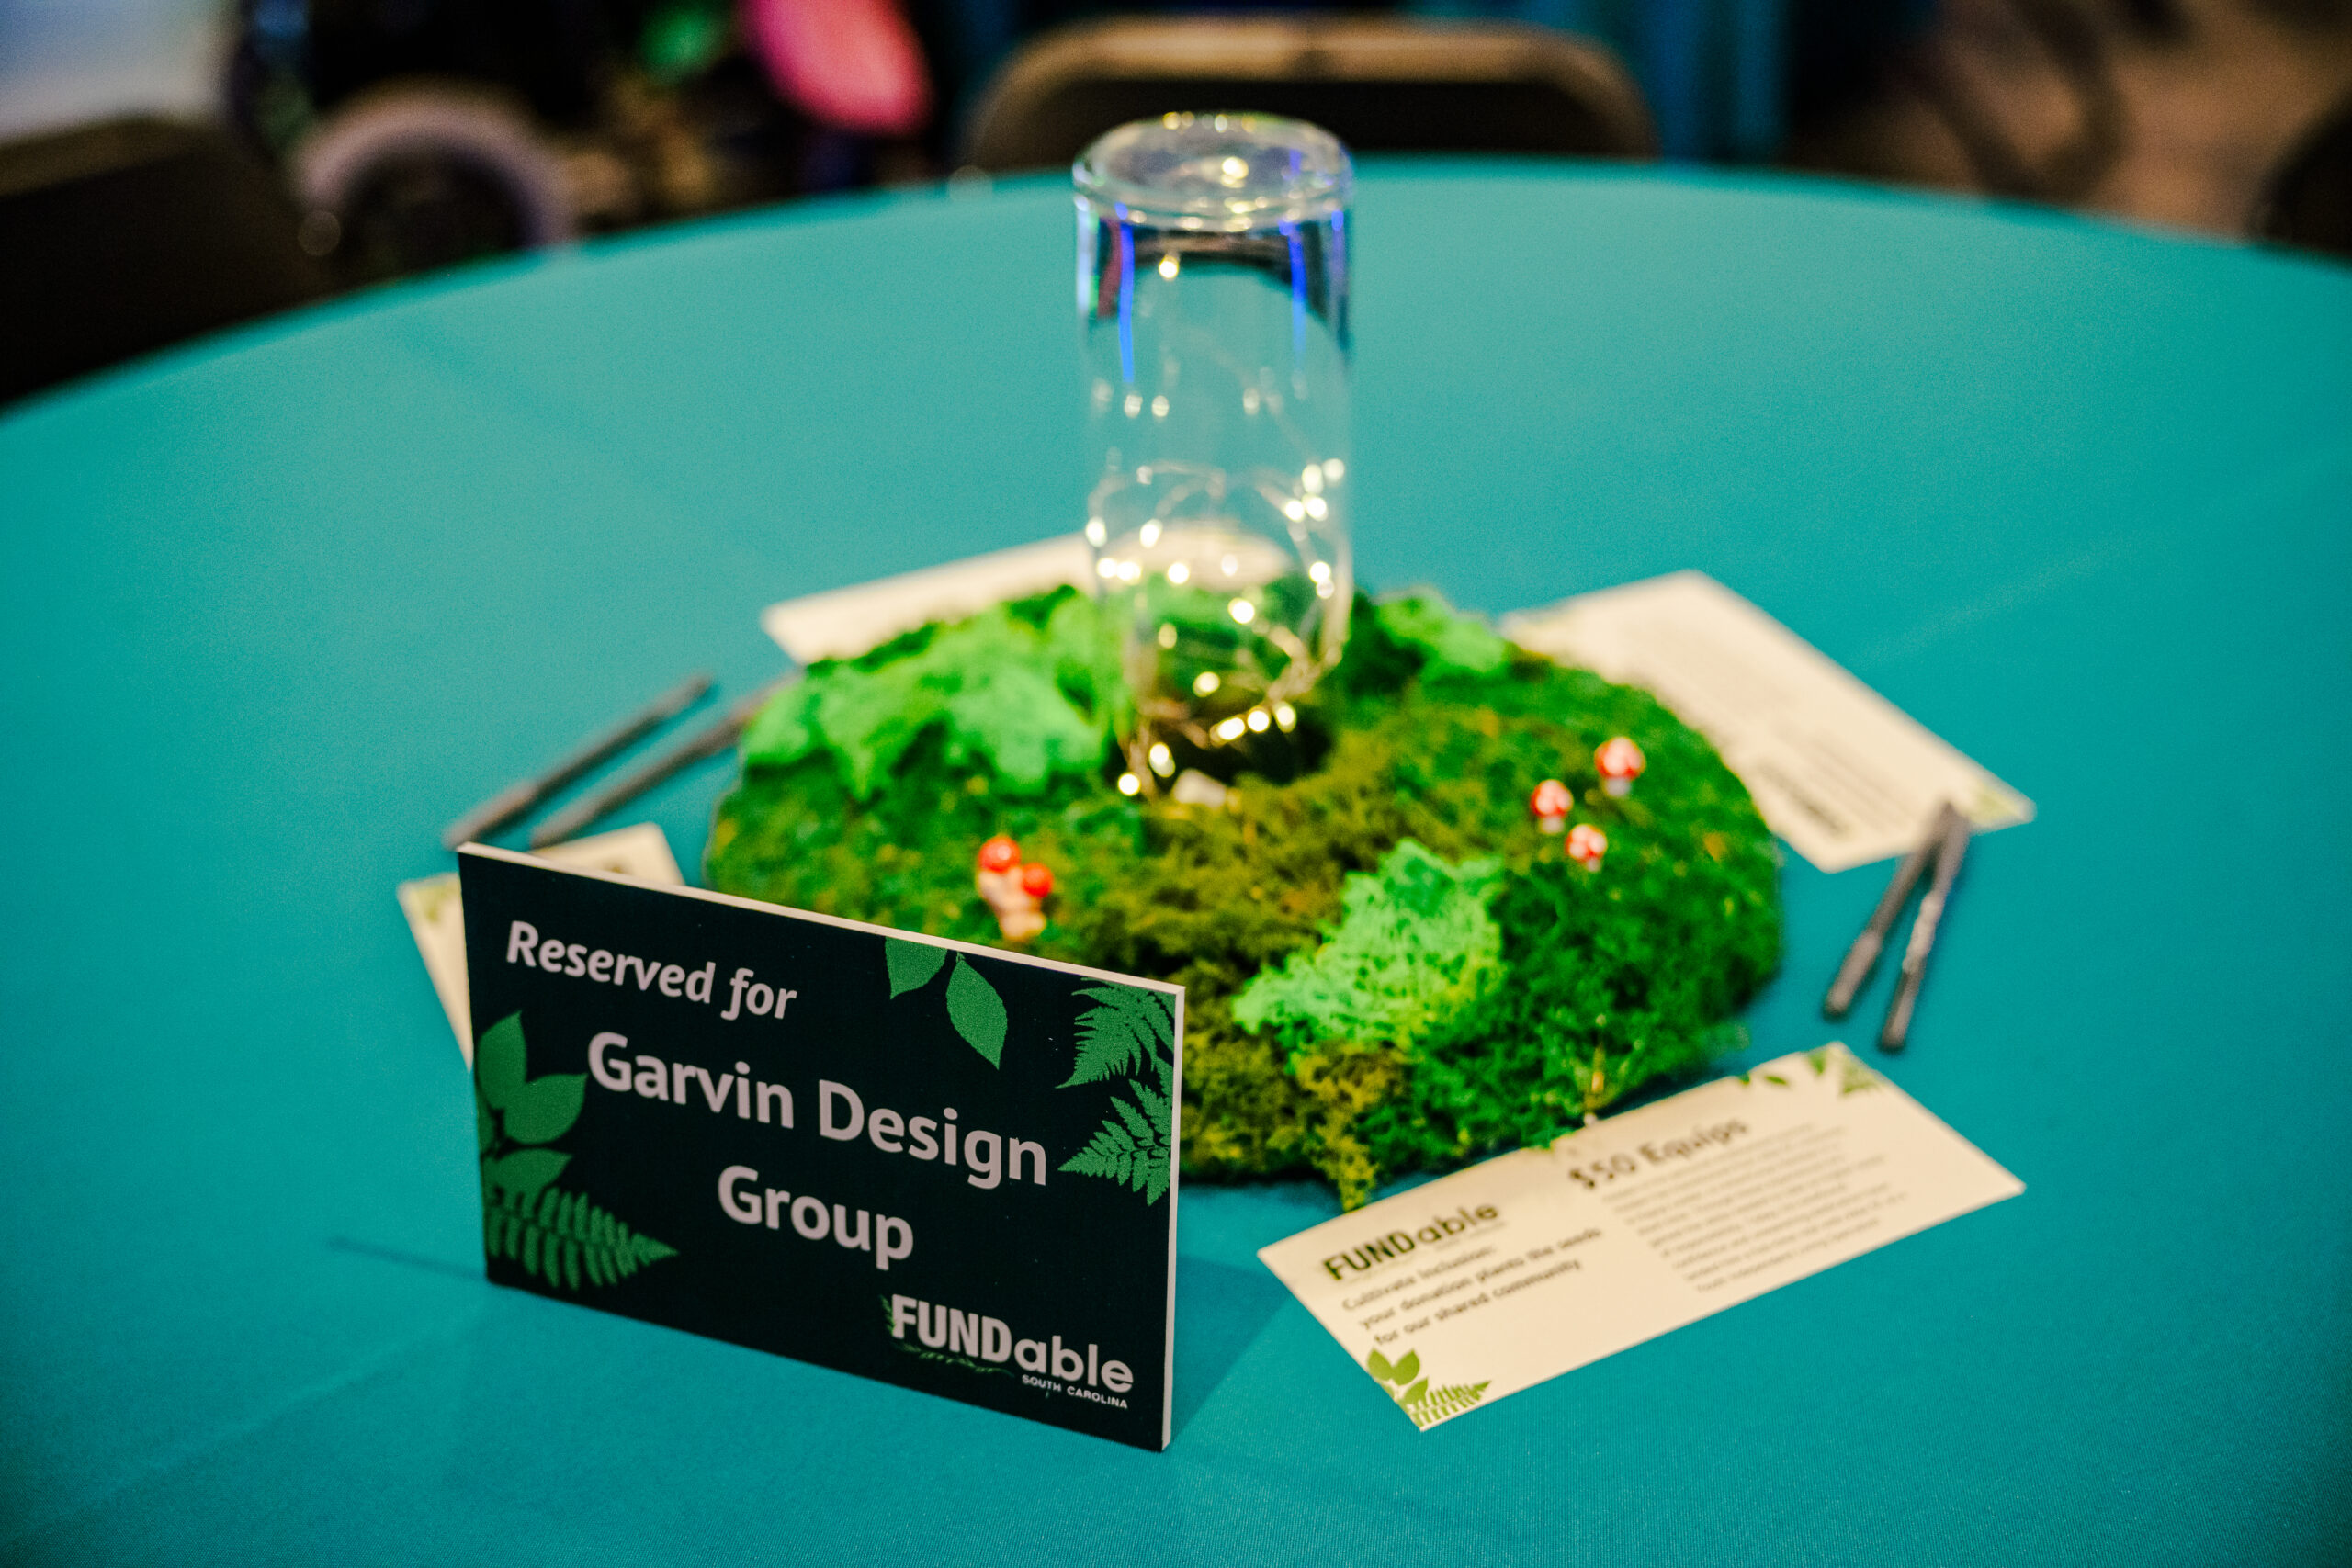 2023 Event centerpiece and tabletop display for a sponsored table.